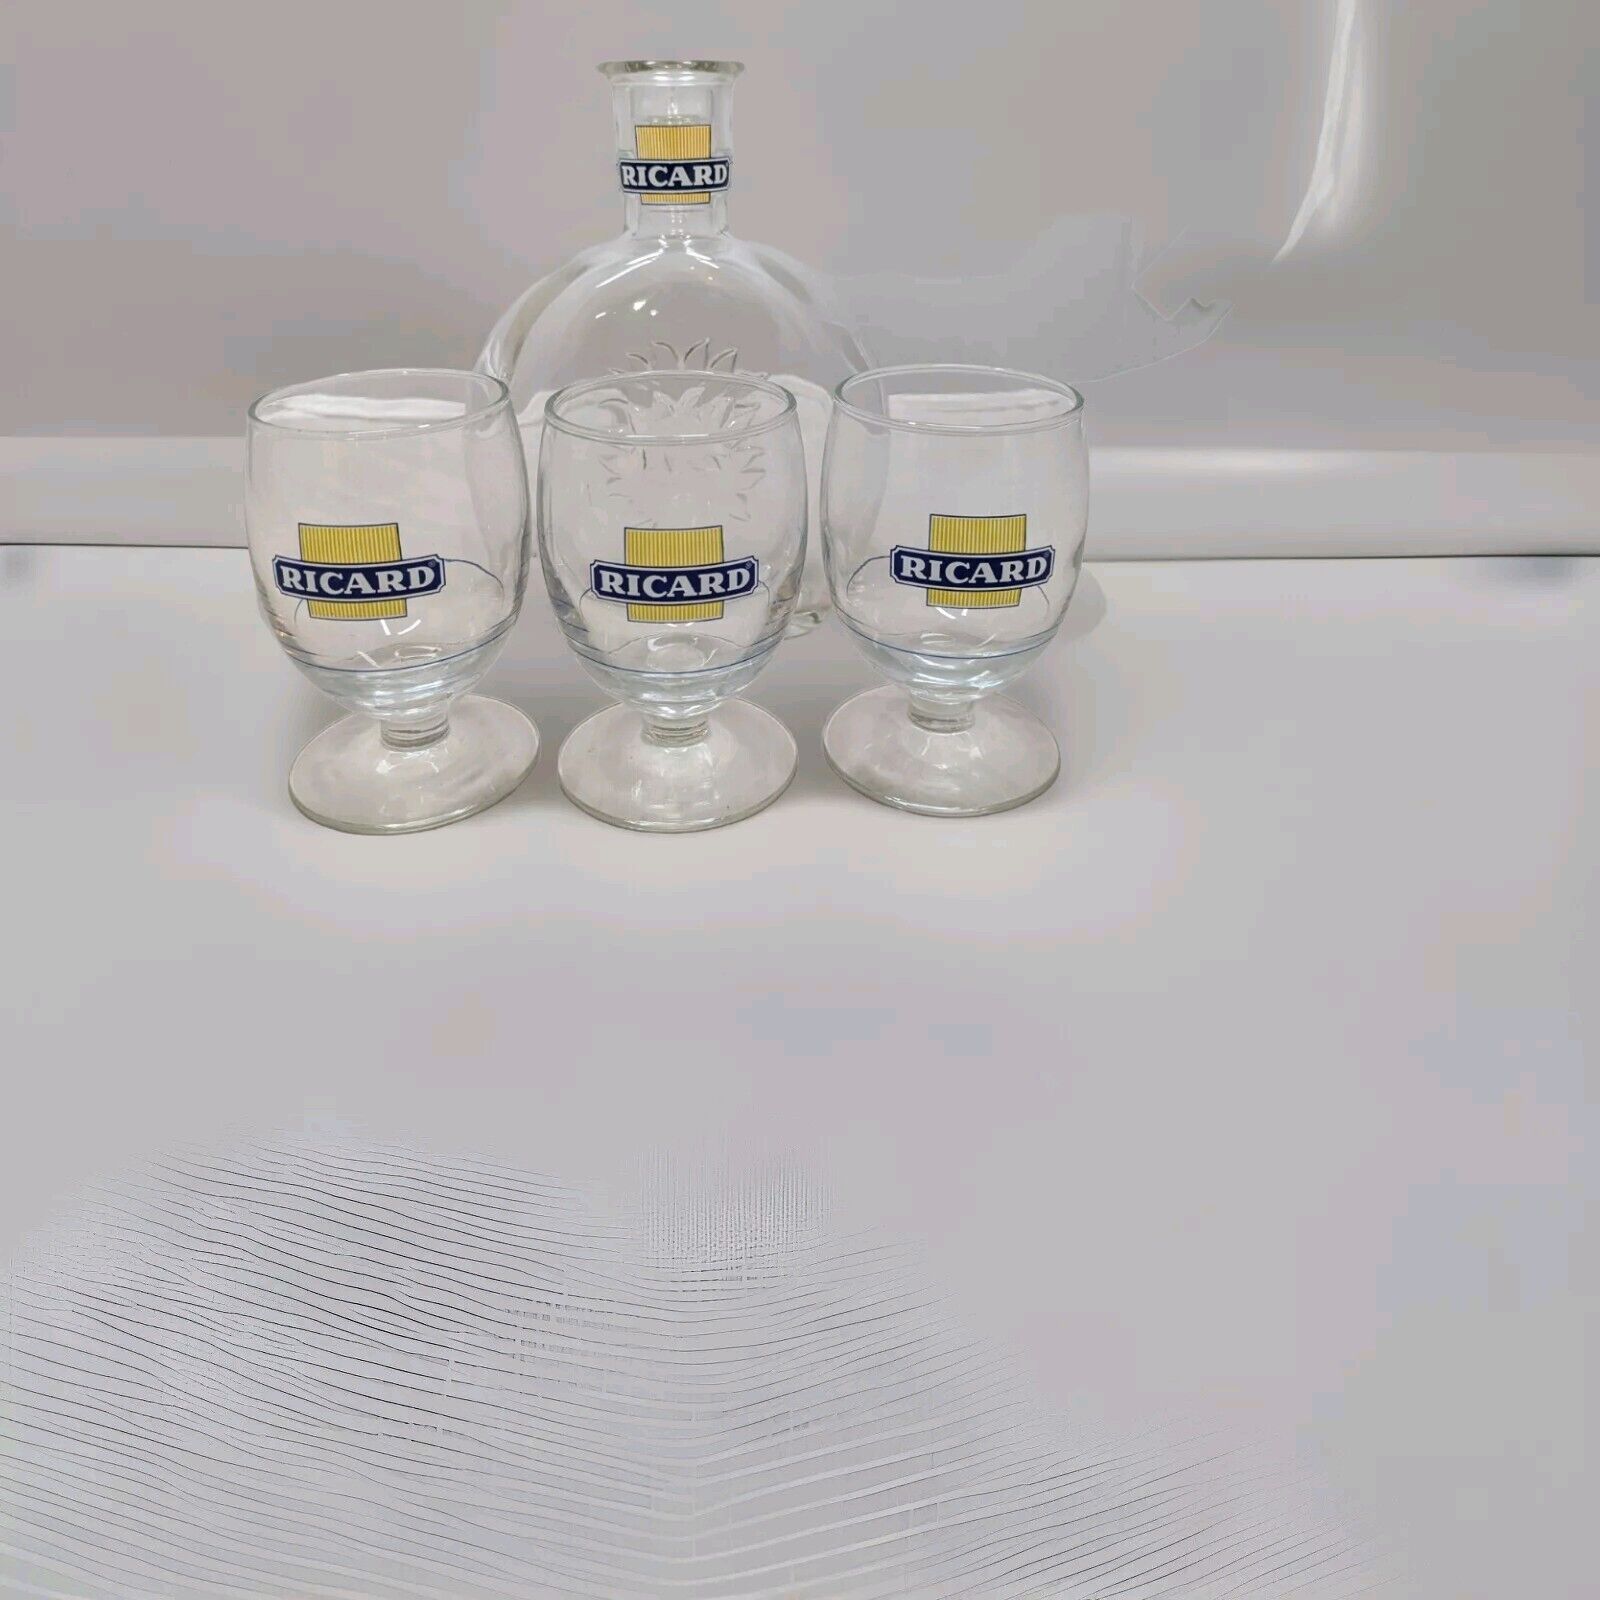 Ricard decanter & 3 glasses ideal man cave item modele depose perfect condition 